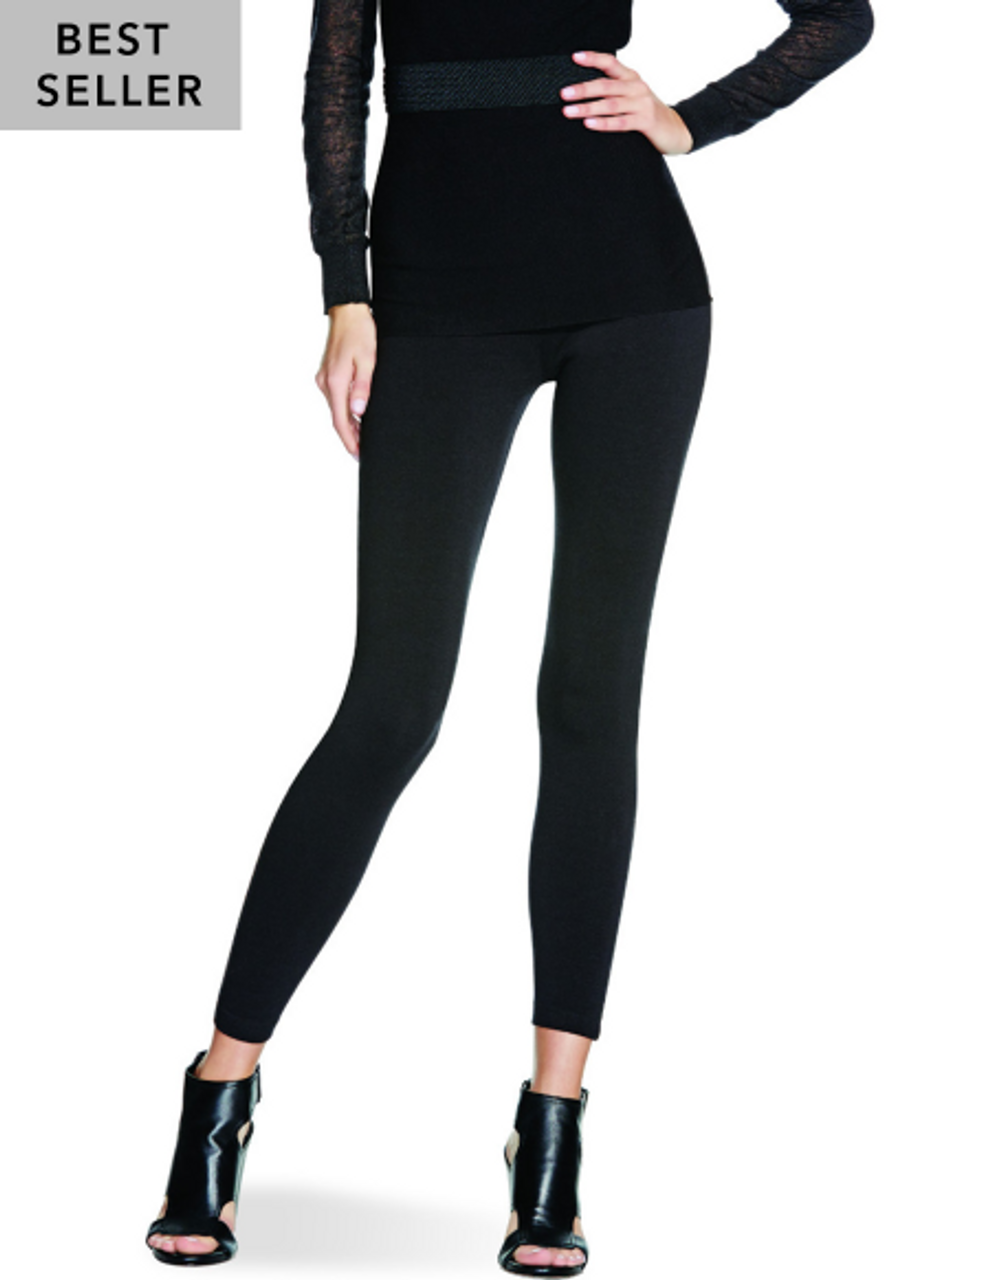 Exceptionally Stylish Polyester Elastane Leggings at Low Prices 